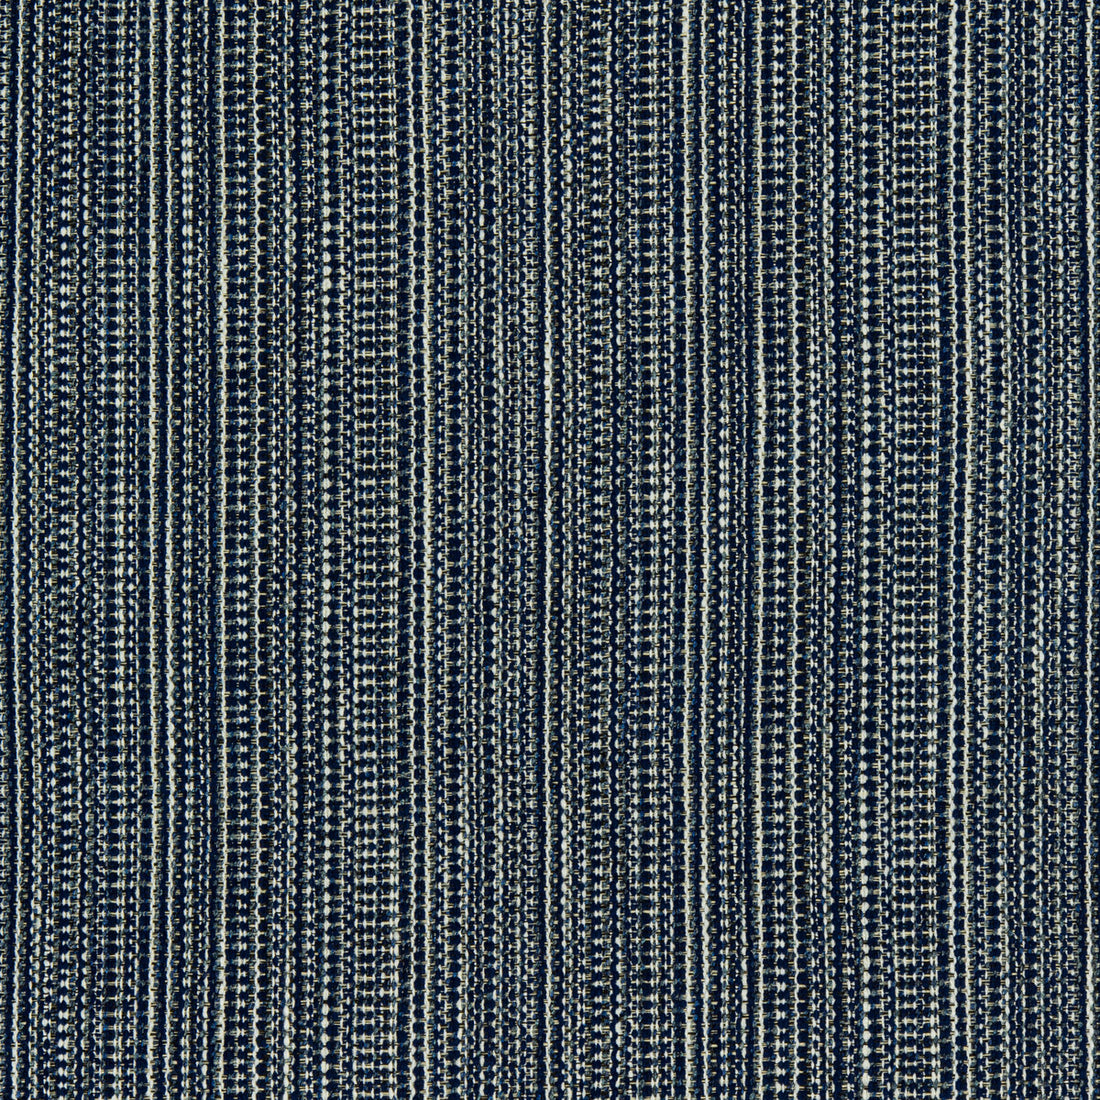 Kravet Design fabric in 36094-51 color - pattern 36094.51.0 - by Kravet Design in the Inside Out Performance Fabrics collection